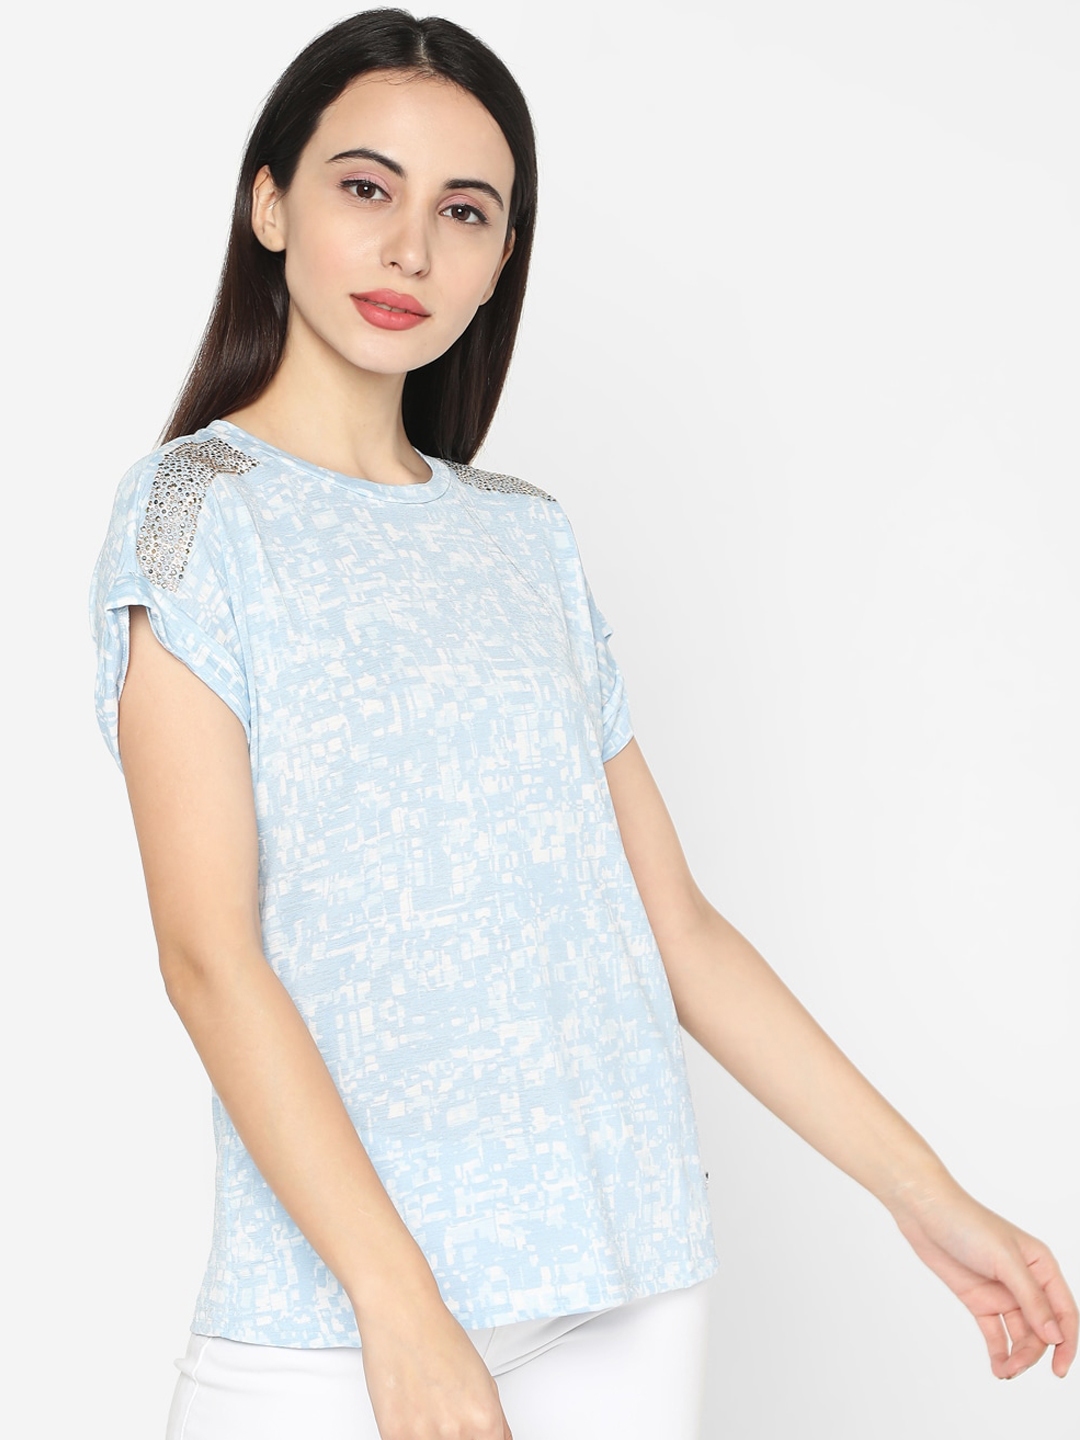 Buy Deal Jeans Women Blue Printed Top - Tops for Women 12791520 | Myntra